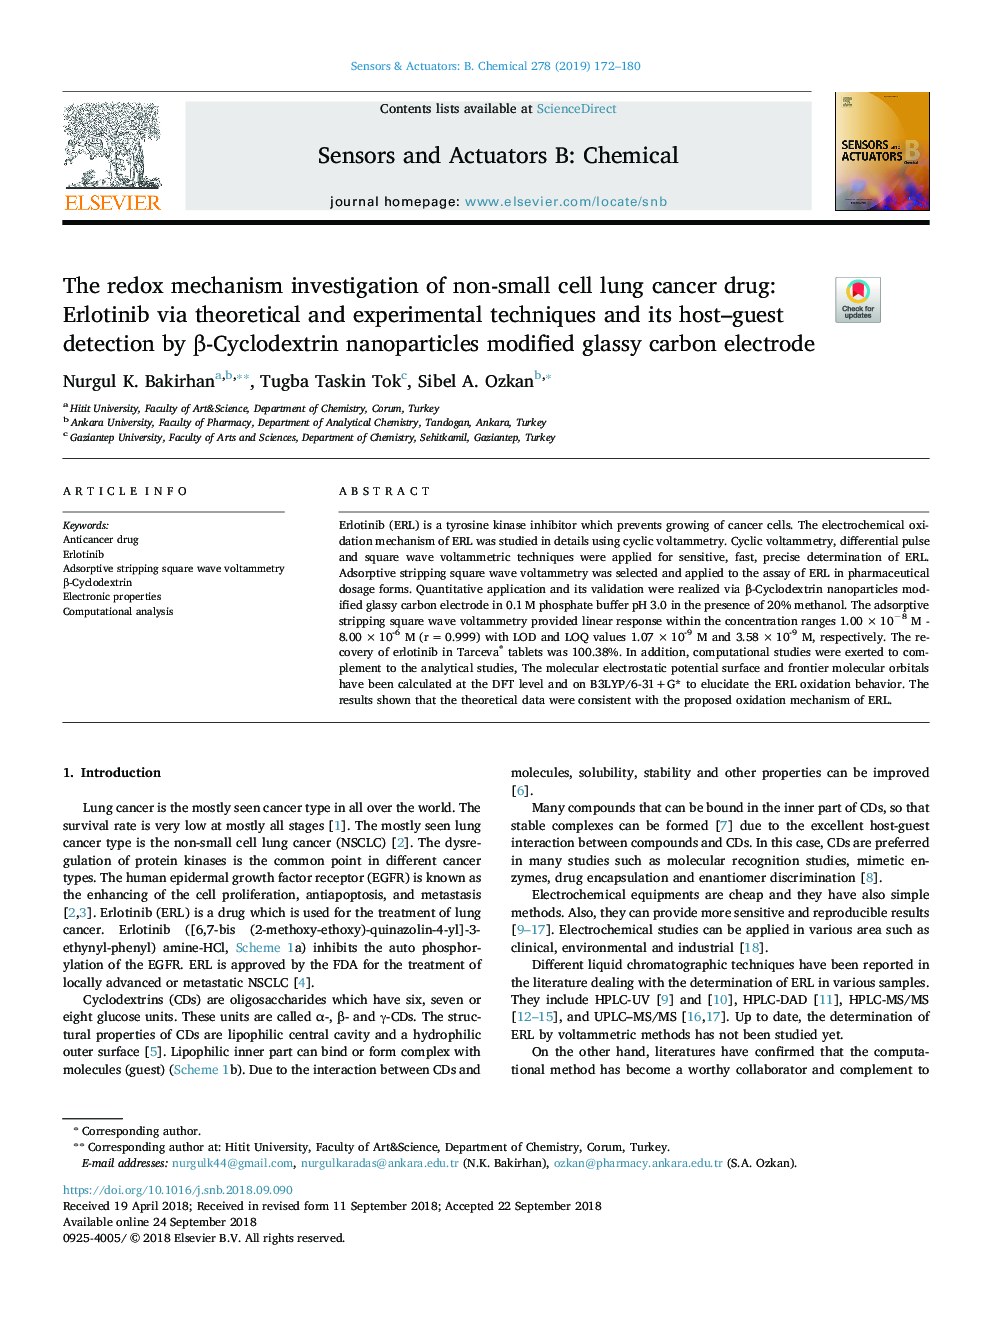 The redox mechanism investigation of non-small cell lung cancer drug: Erlotinib via theoretical and experimental techniques and its host-guest detection by Î²-Cyclodextrin nanoparticles modified glassy carbon electrode